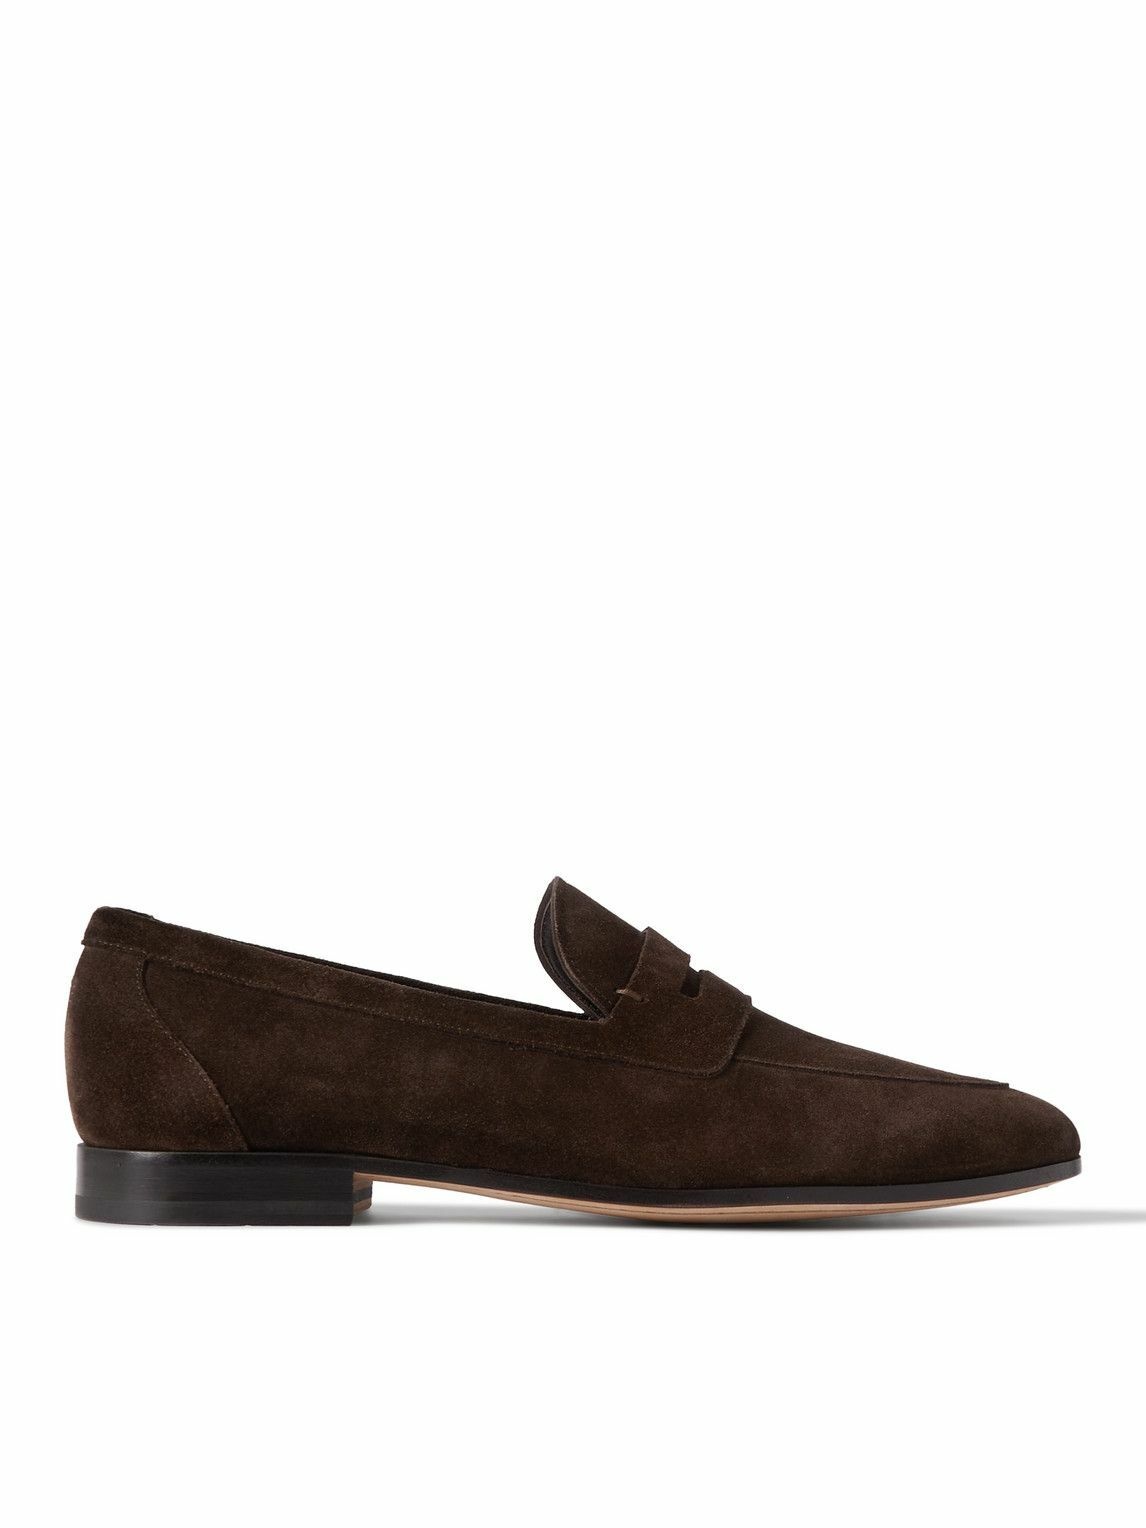 Photo: J.M. Weston - Suede Loafers - Brown